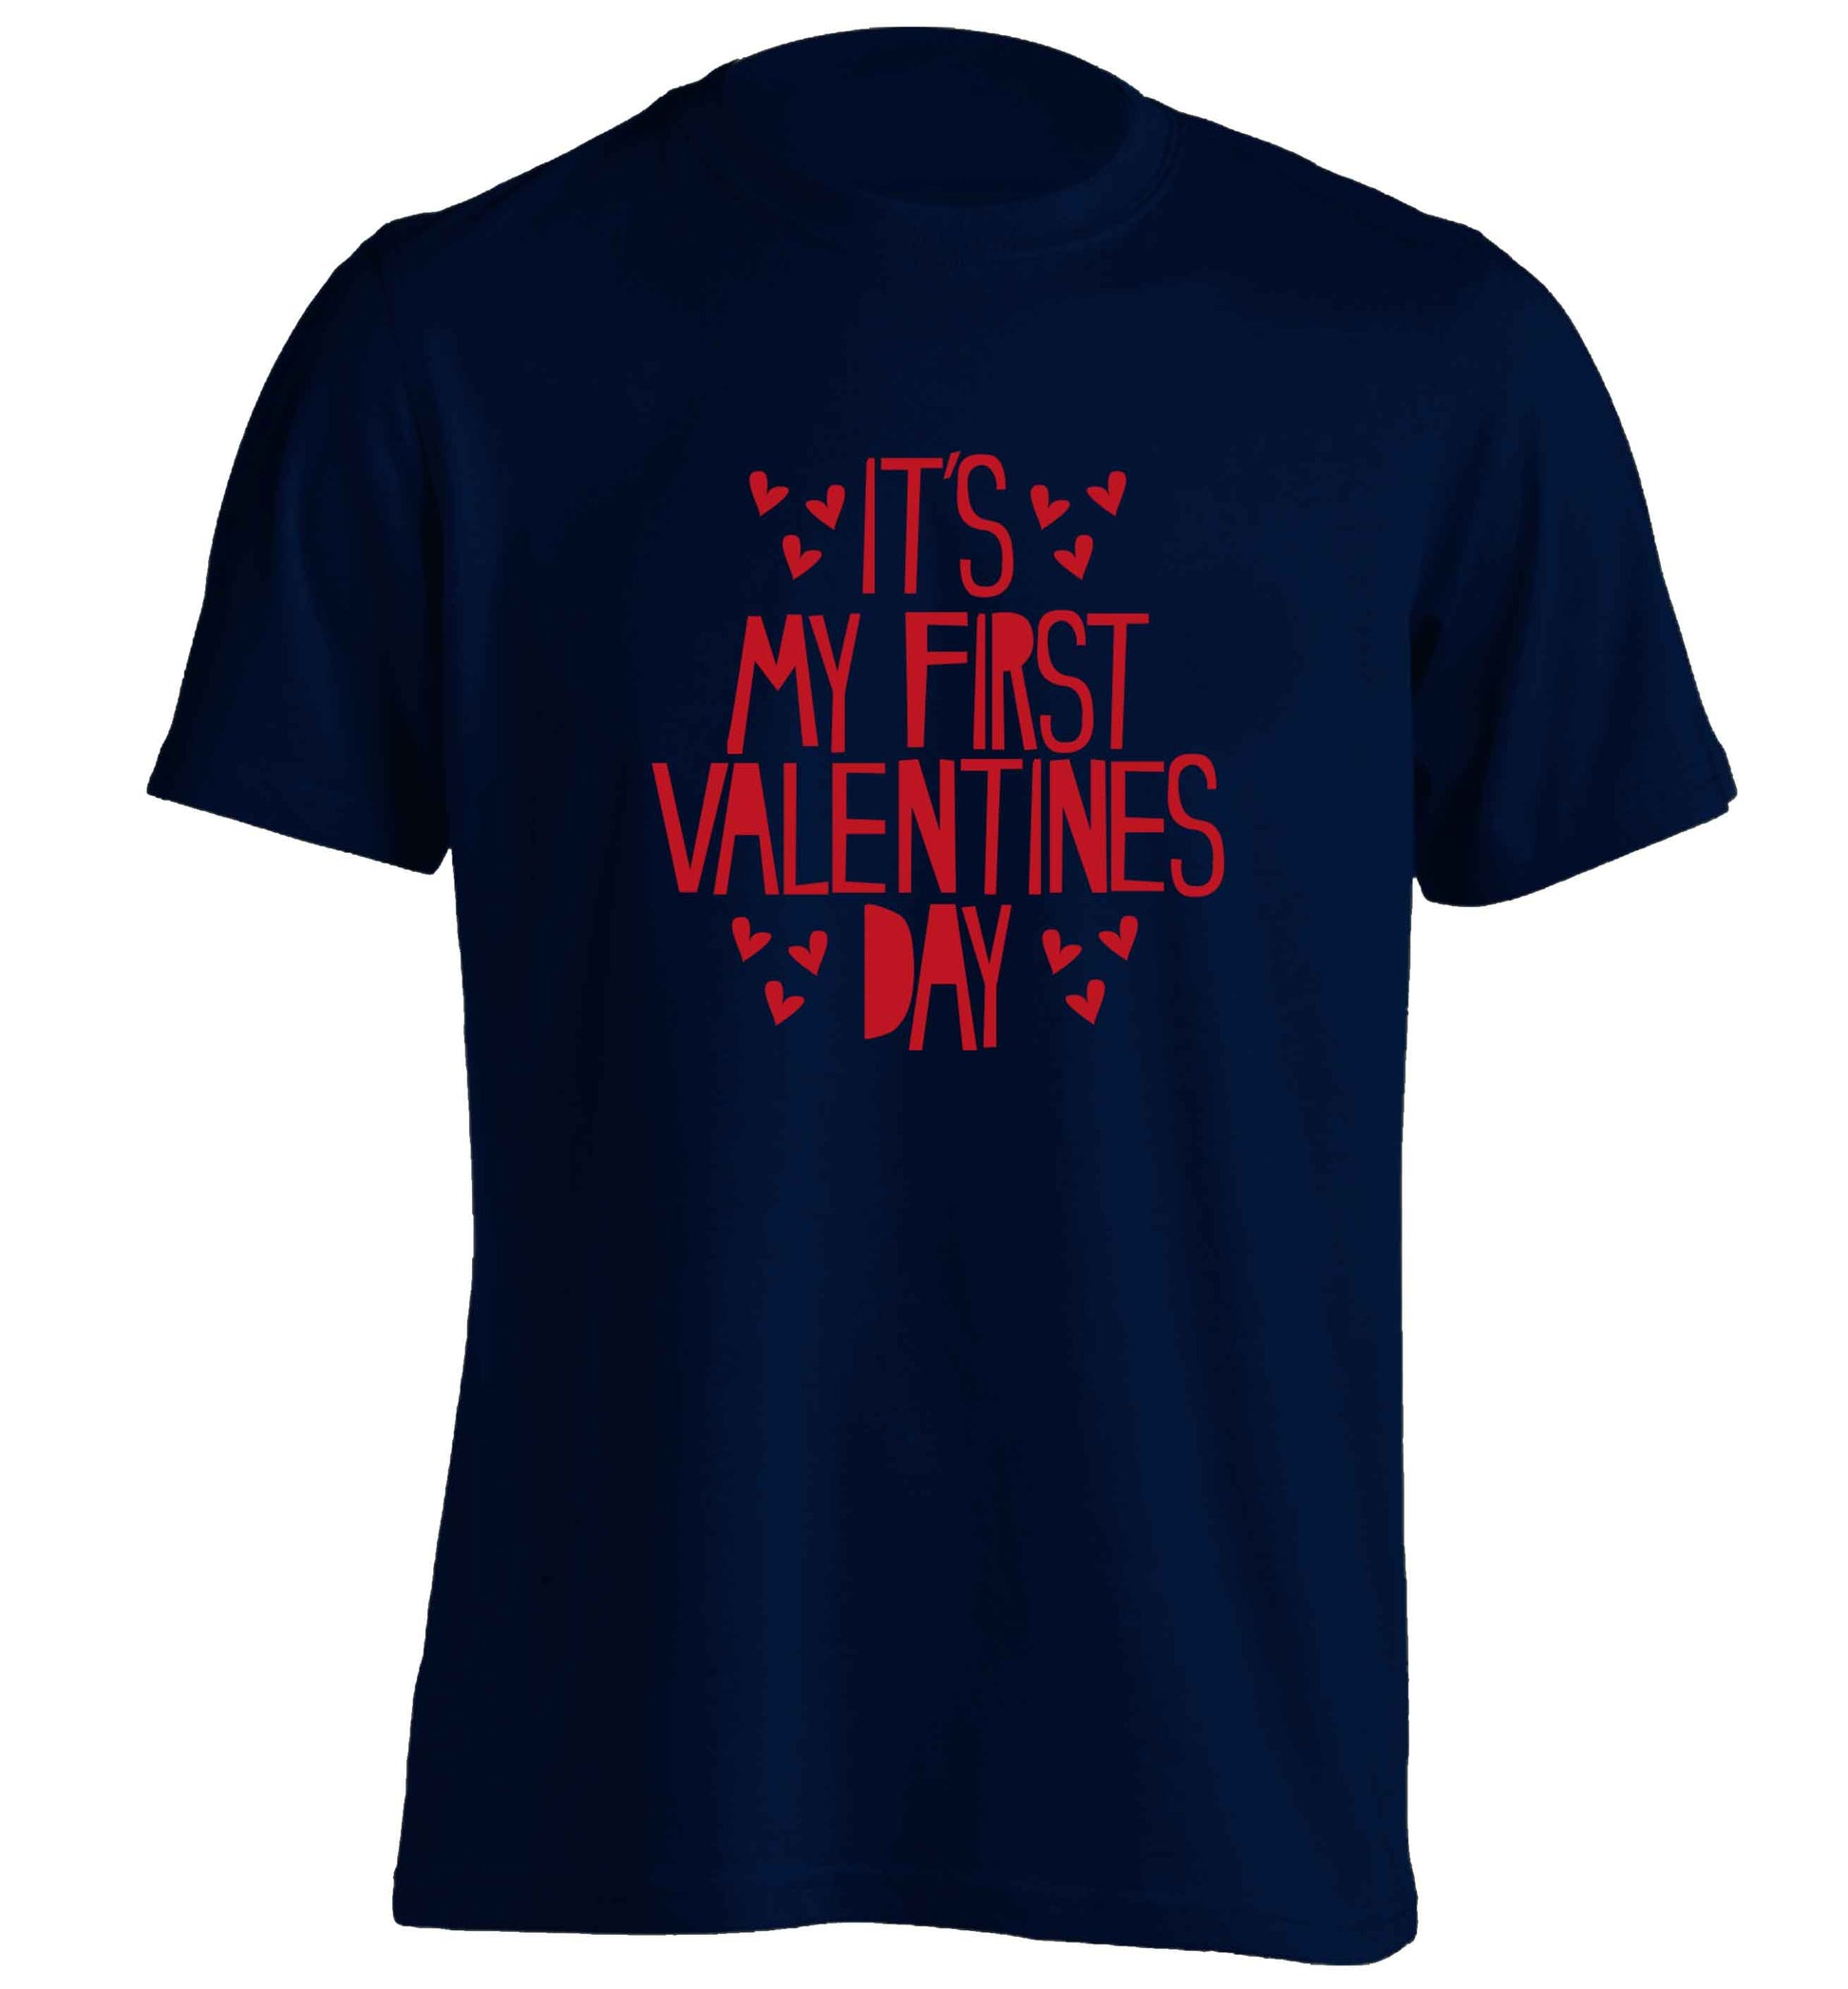 Hearts It's my First Valentine's Day adults unisex navy Tshirt 2XL